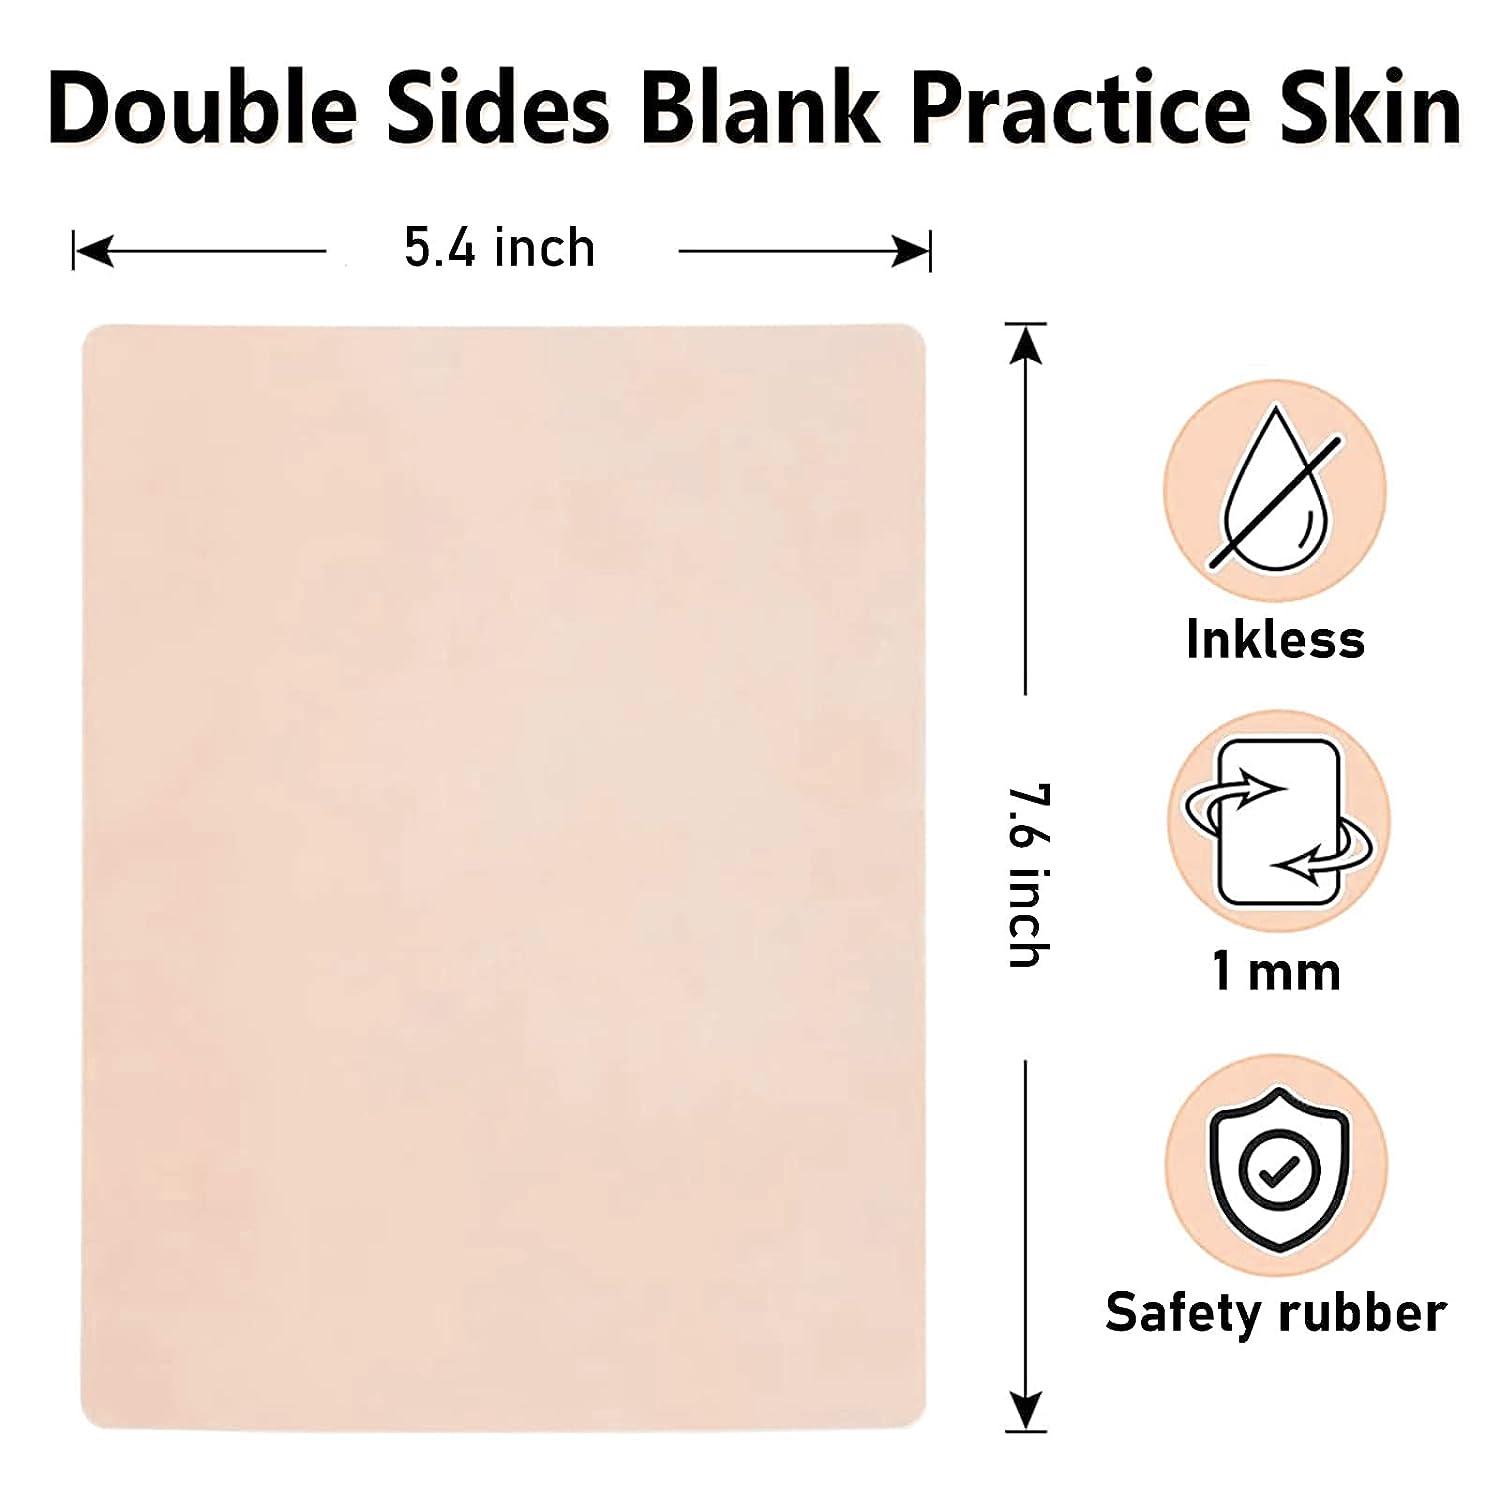  Tattoo Practice Skin with Transfer Paper - Ruicoo 30Pcs Tattoo  Skin Practice Kit Including 10Pcs Tattoo Fake Skins and 20Pcs Tattoo  Transfer Paper for Beginners or Artists Tattoo Supplies : Beauty